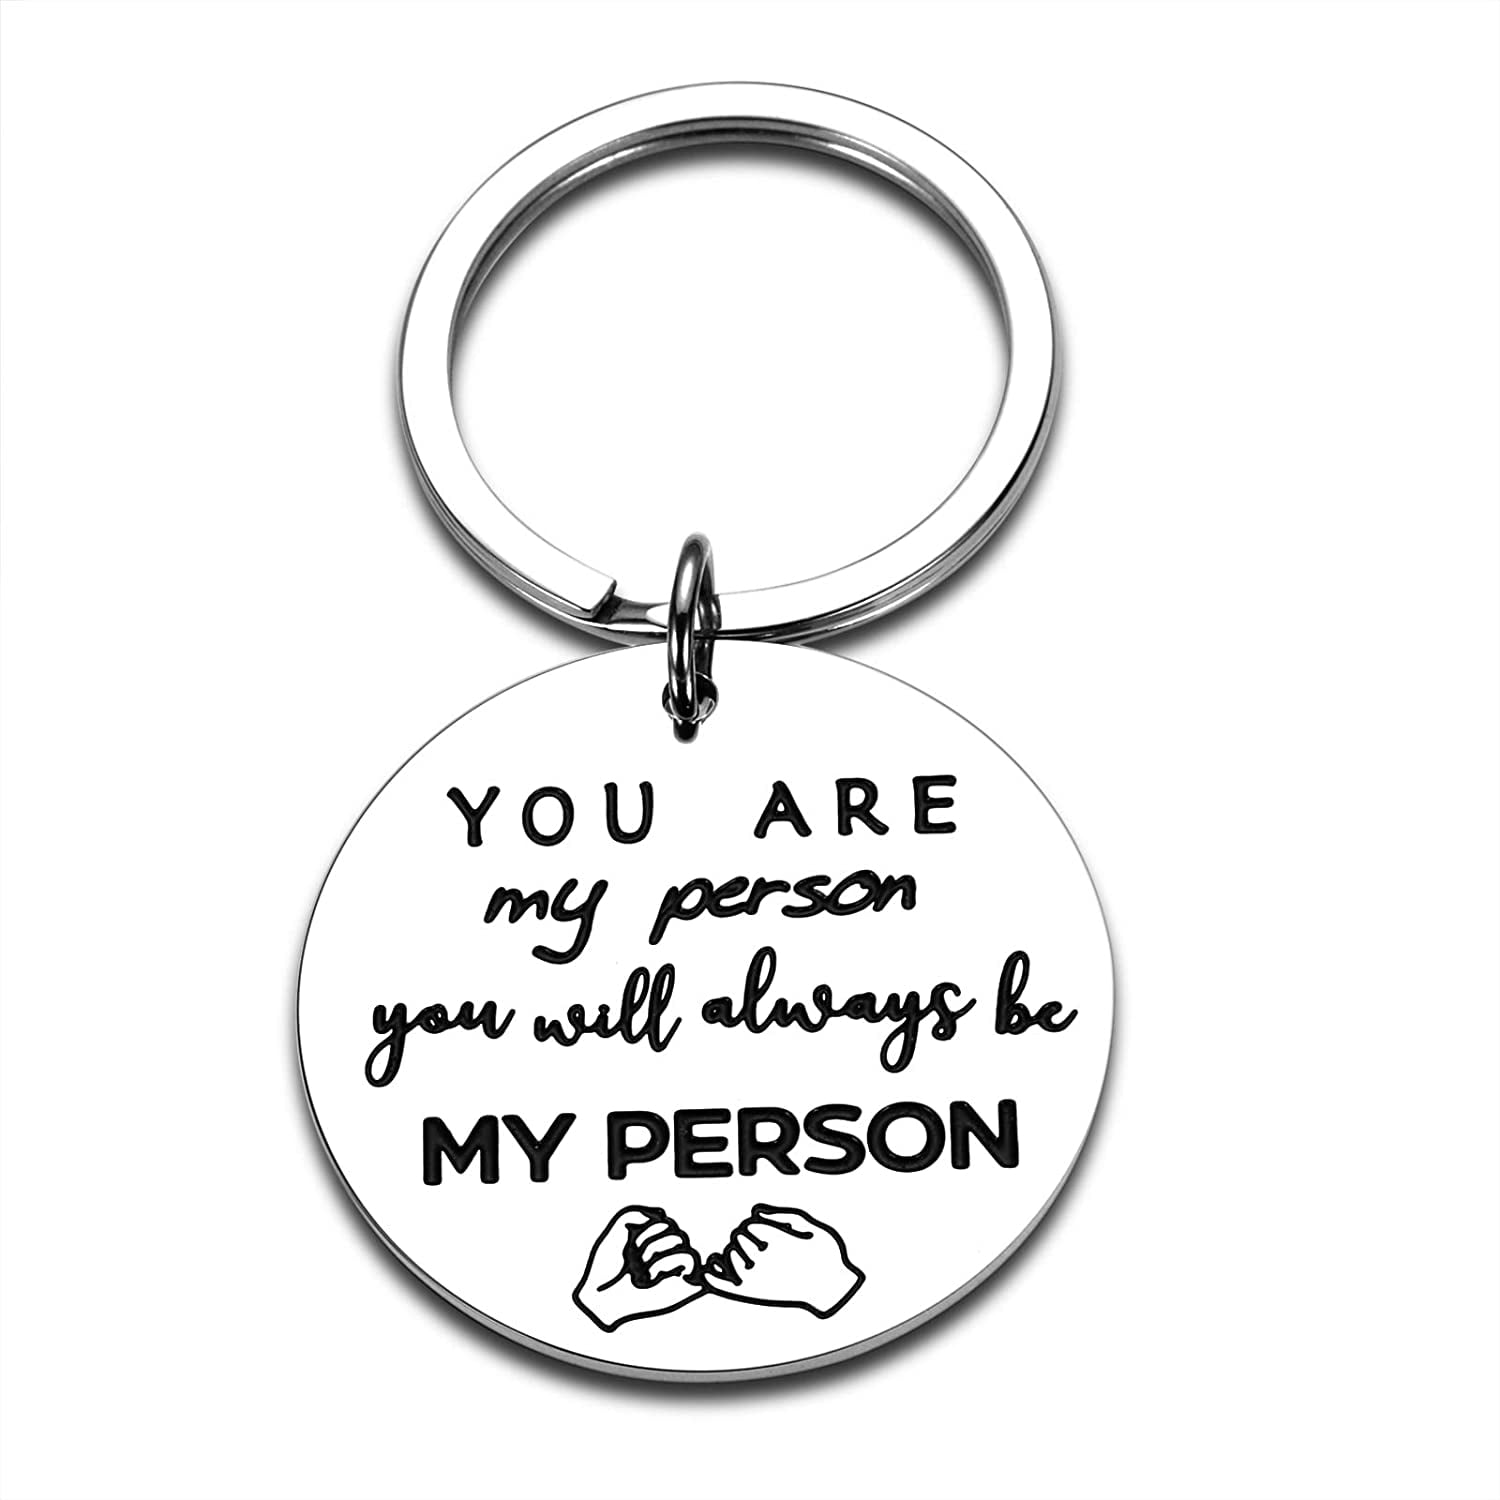 Best Friend Gifts Keychain for Women Men Teen Girls You are My Person Couple Gifts for Boyfriend Girlfriend Wife Husband Birthday Valentines Wedding Friendship Key Ring Pendant for BFF Sisters Bestie 